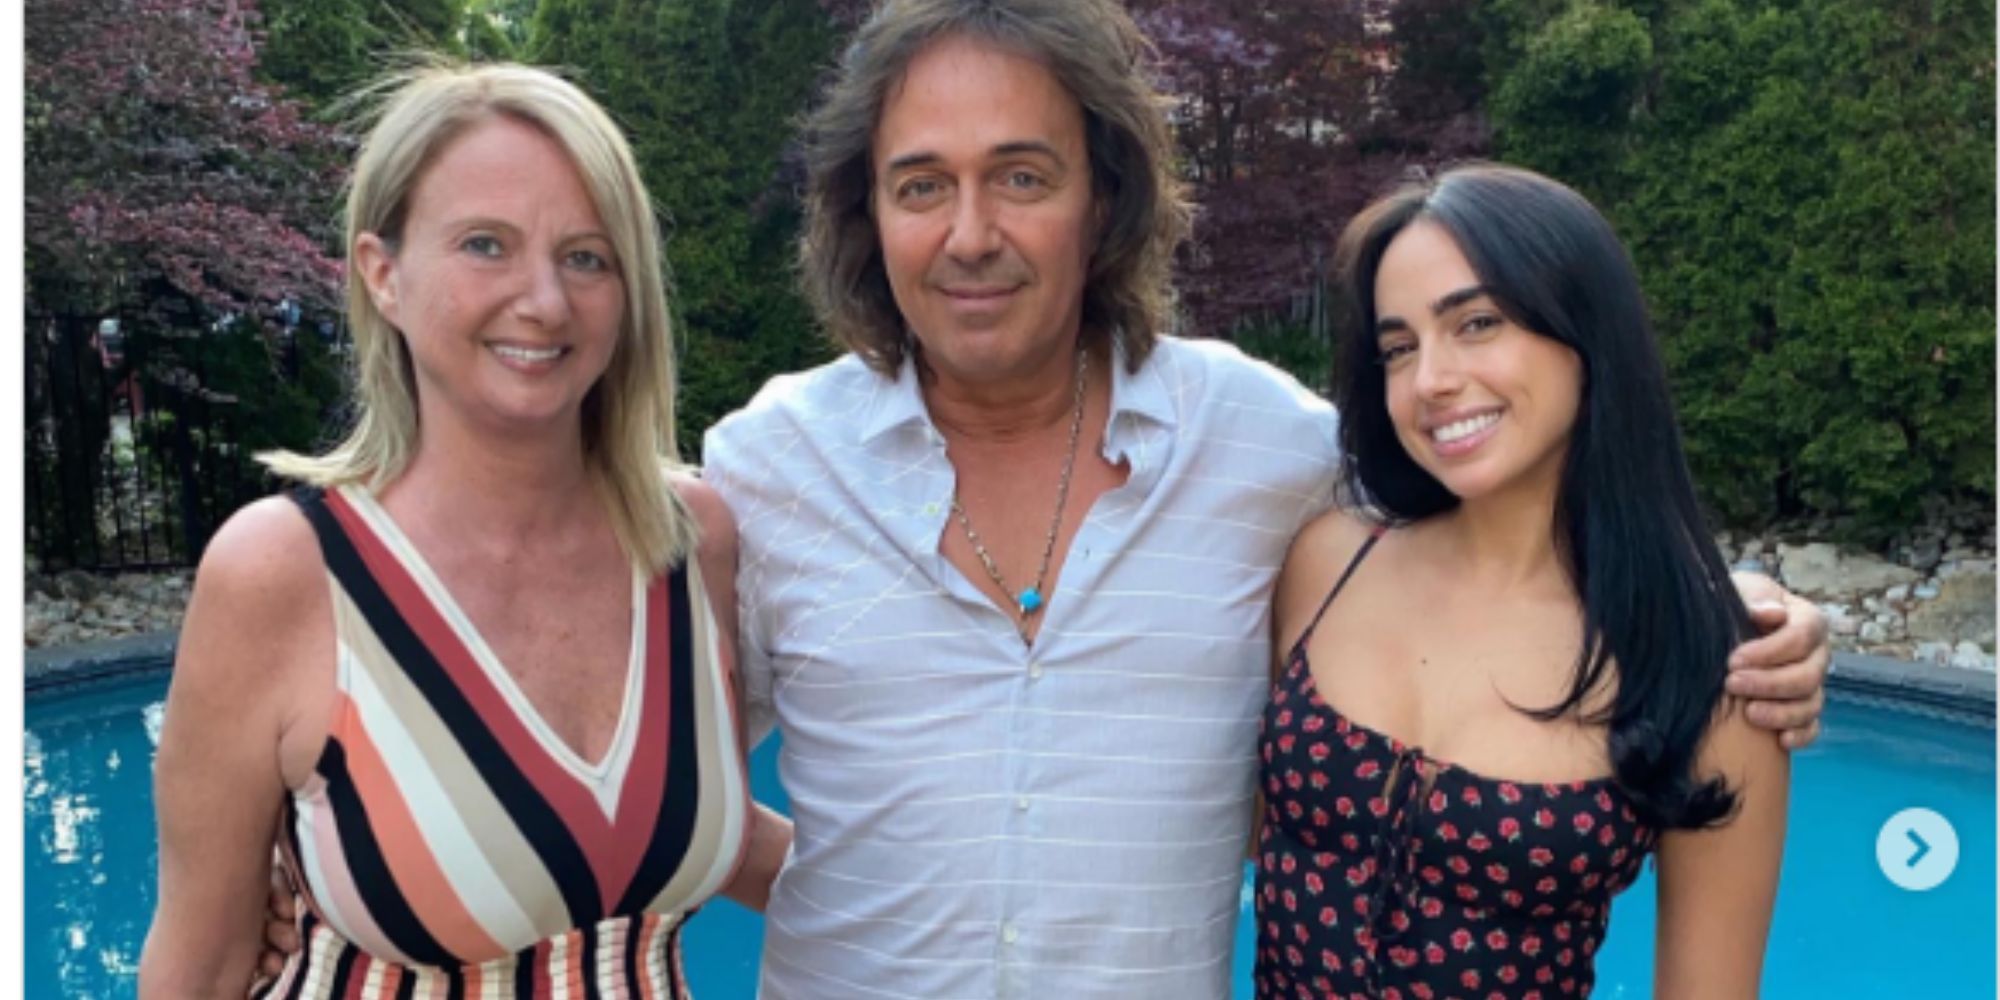 The Bachelor 28 Maria Georgas with parents, Nick Georgas & Lori Georgas posing together in front of a swimming pool